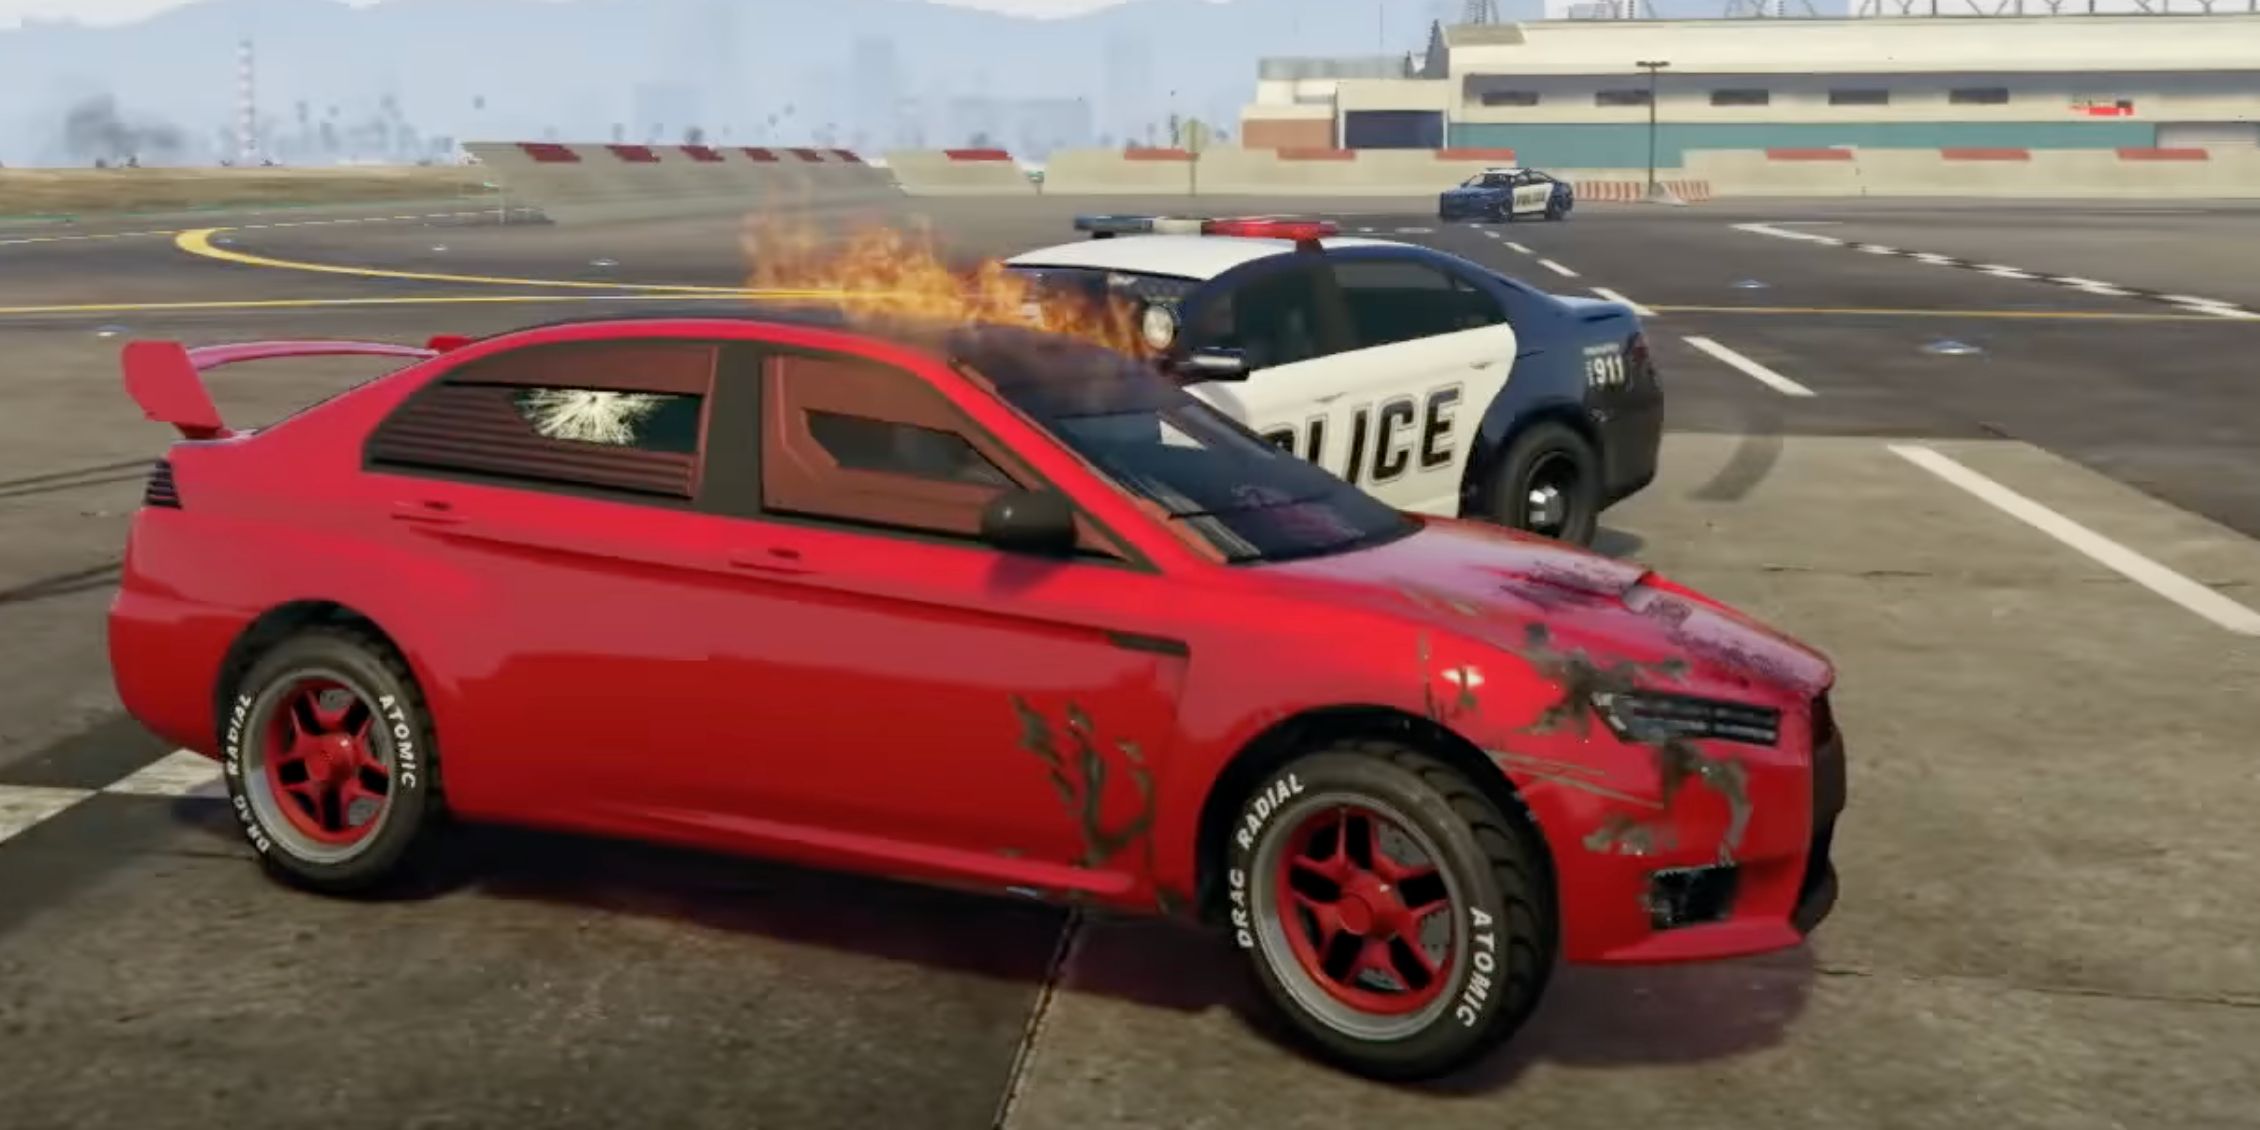 GTA Online How To Get Vehicle Back Caught By Police